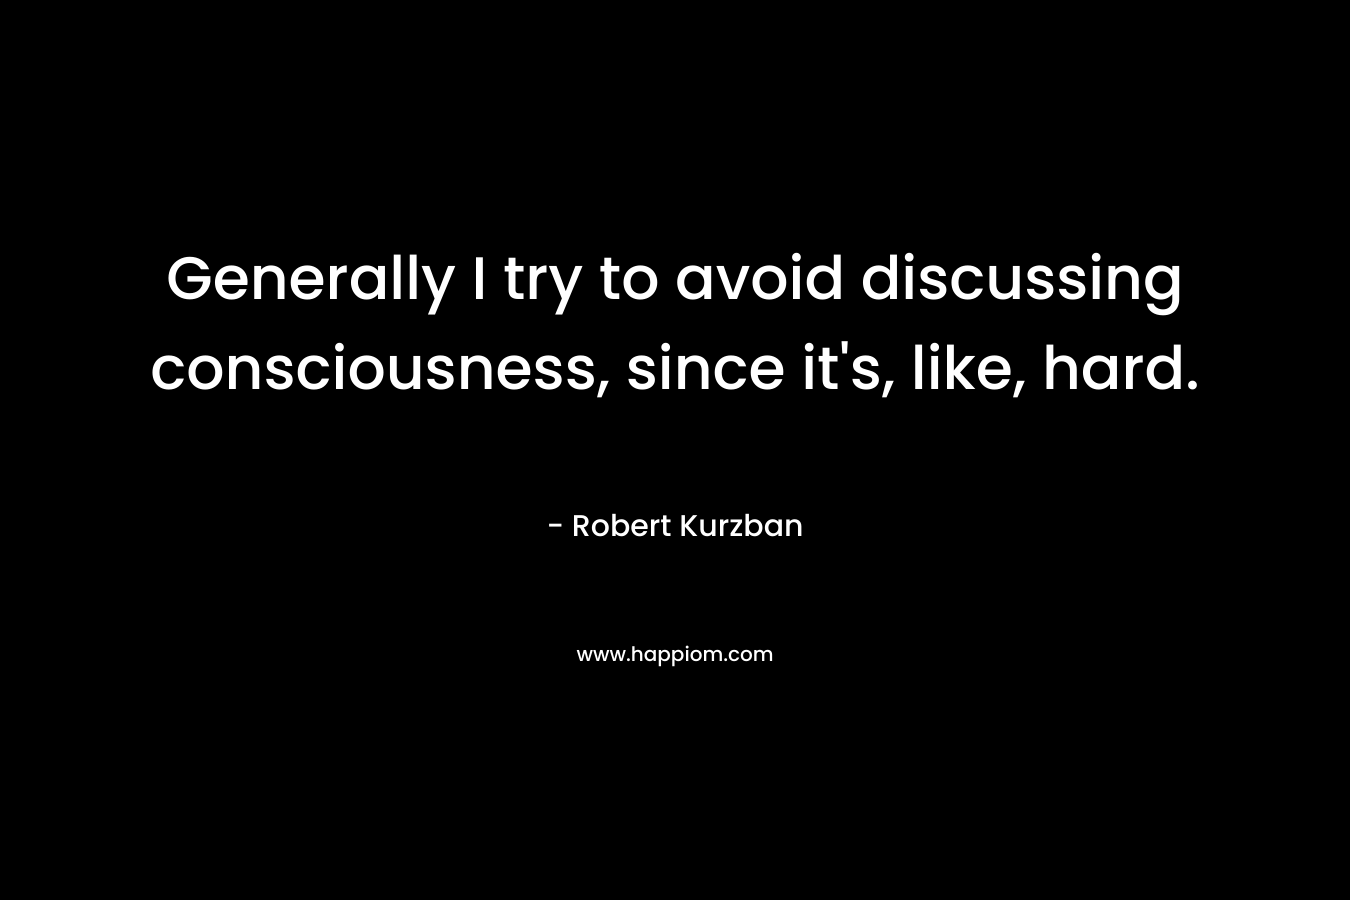 Generally I try to avoid discussing consciousness, since it's, like, hard.